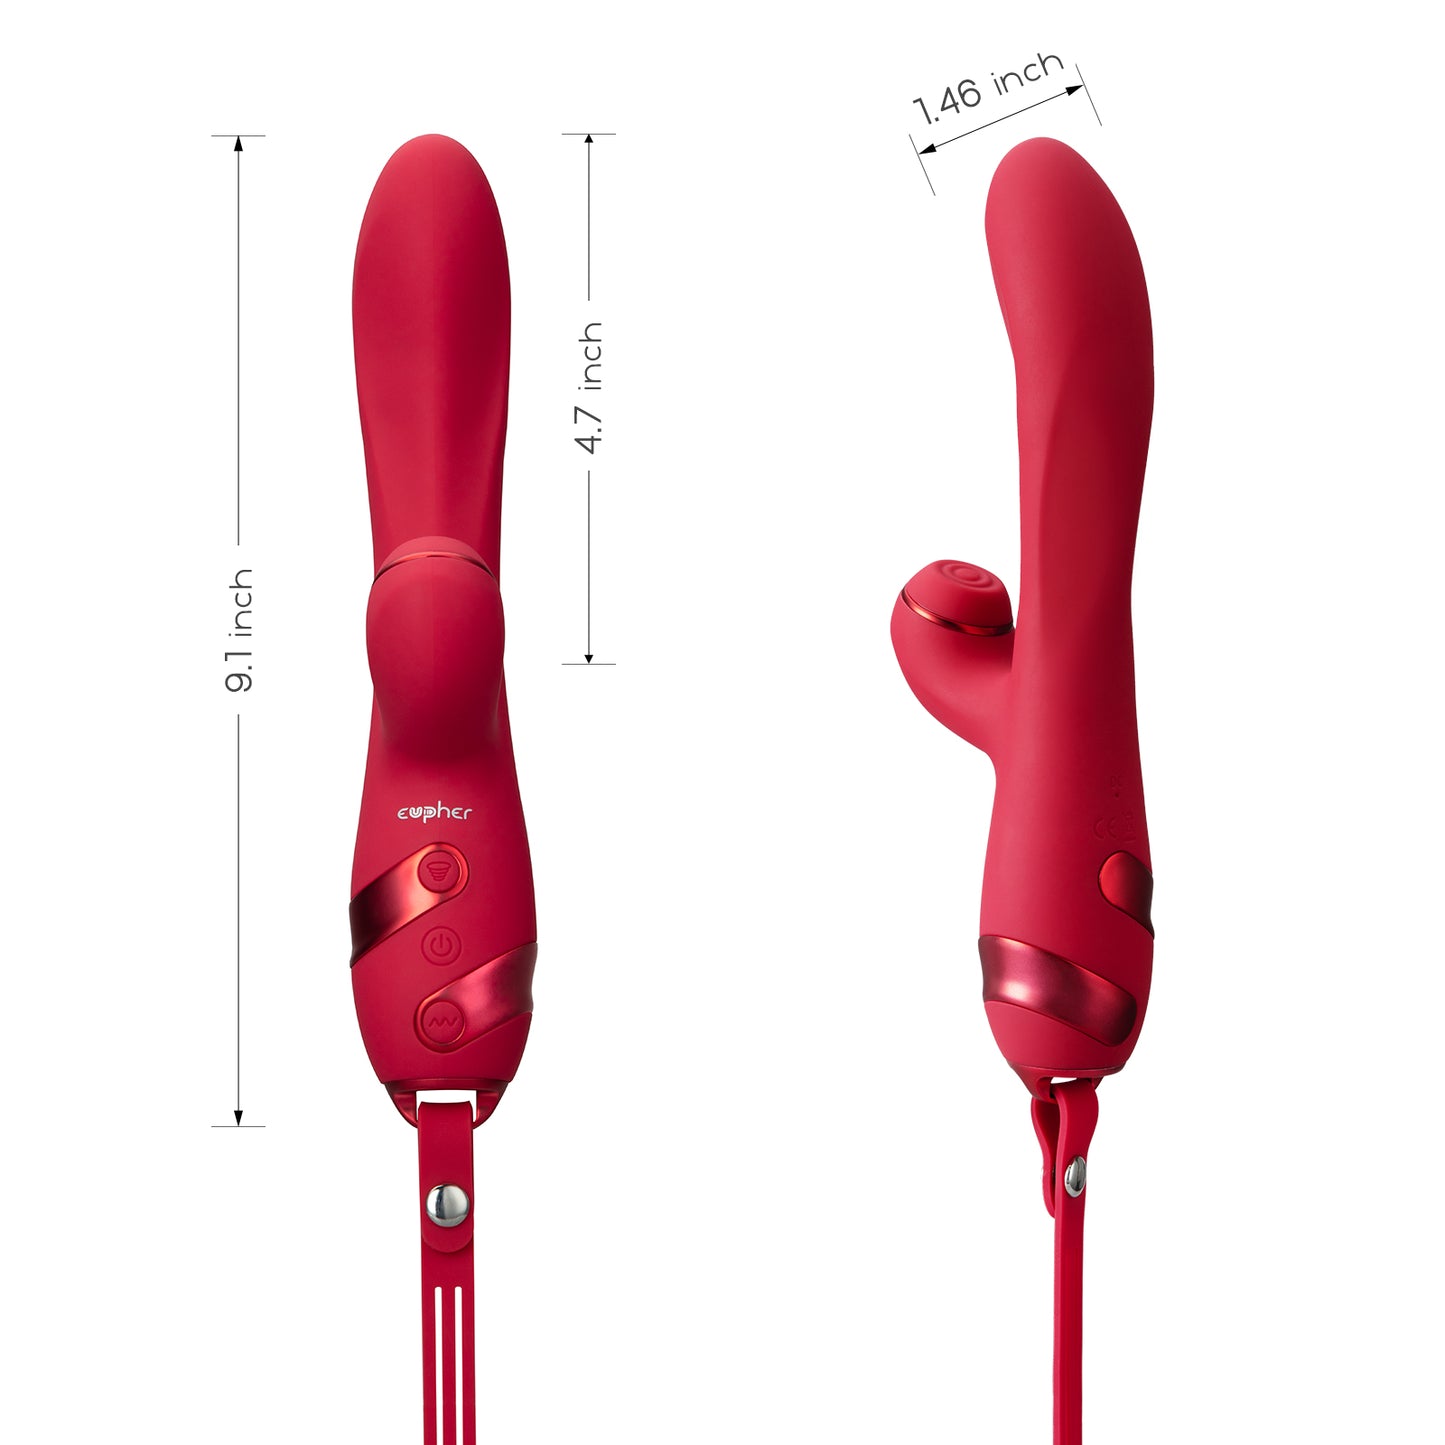 G Spot Clitoral Vibrator with BDSM Whip